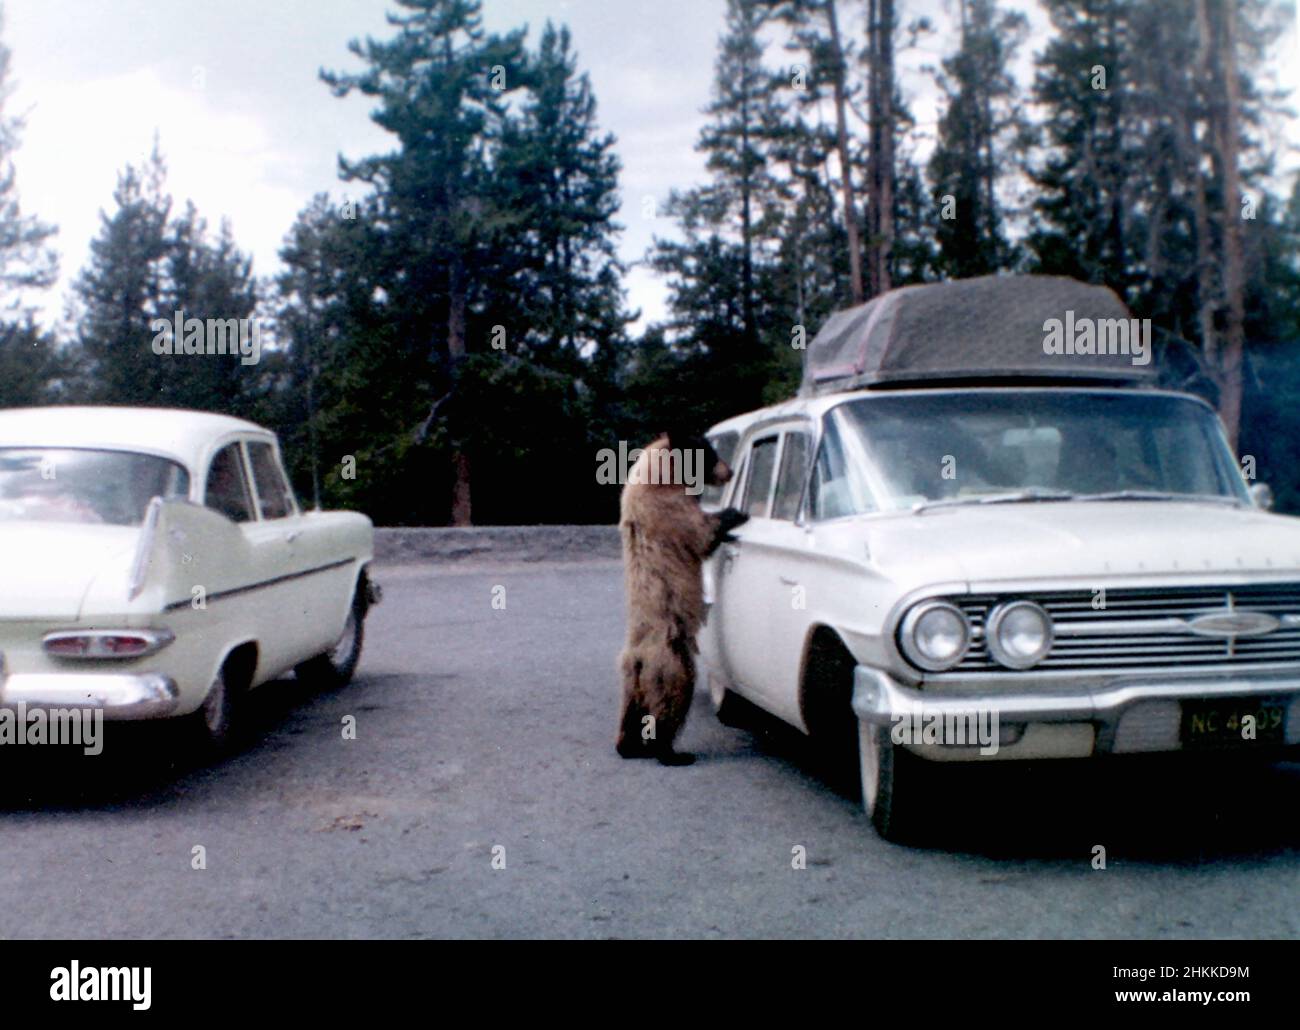 A wild bear begs for food from a tourist car in Yellowstone National Park, ca. 1960. Stock Photo